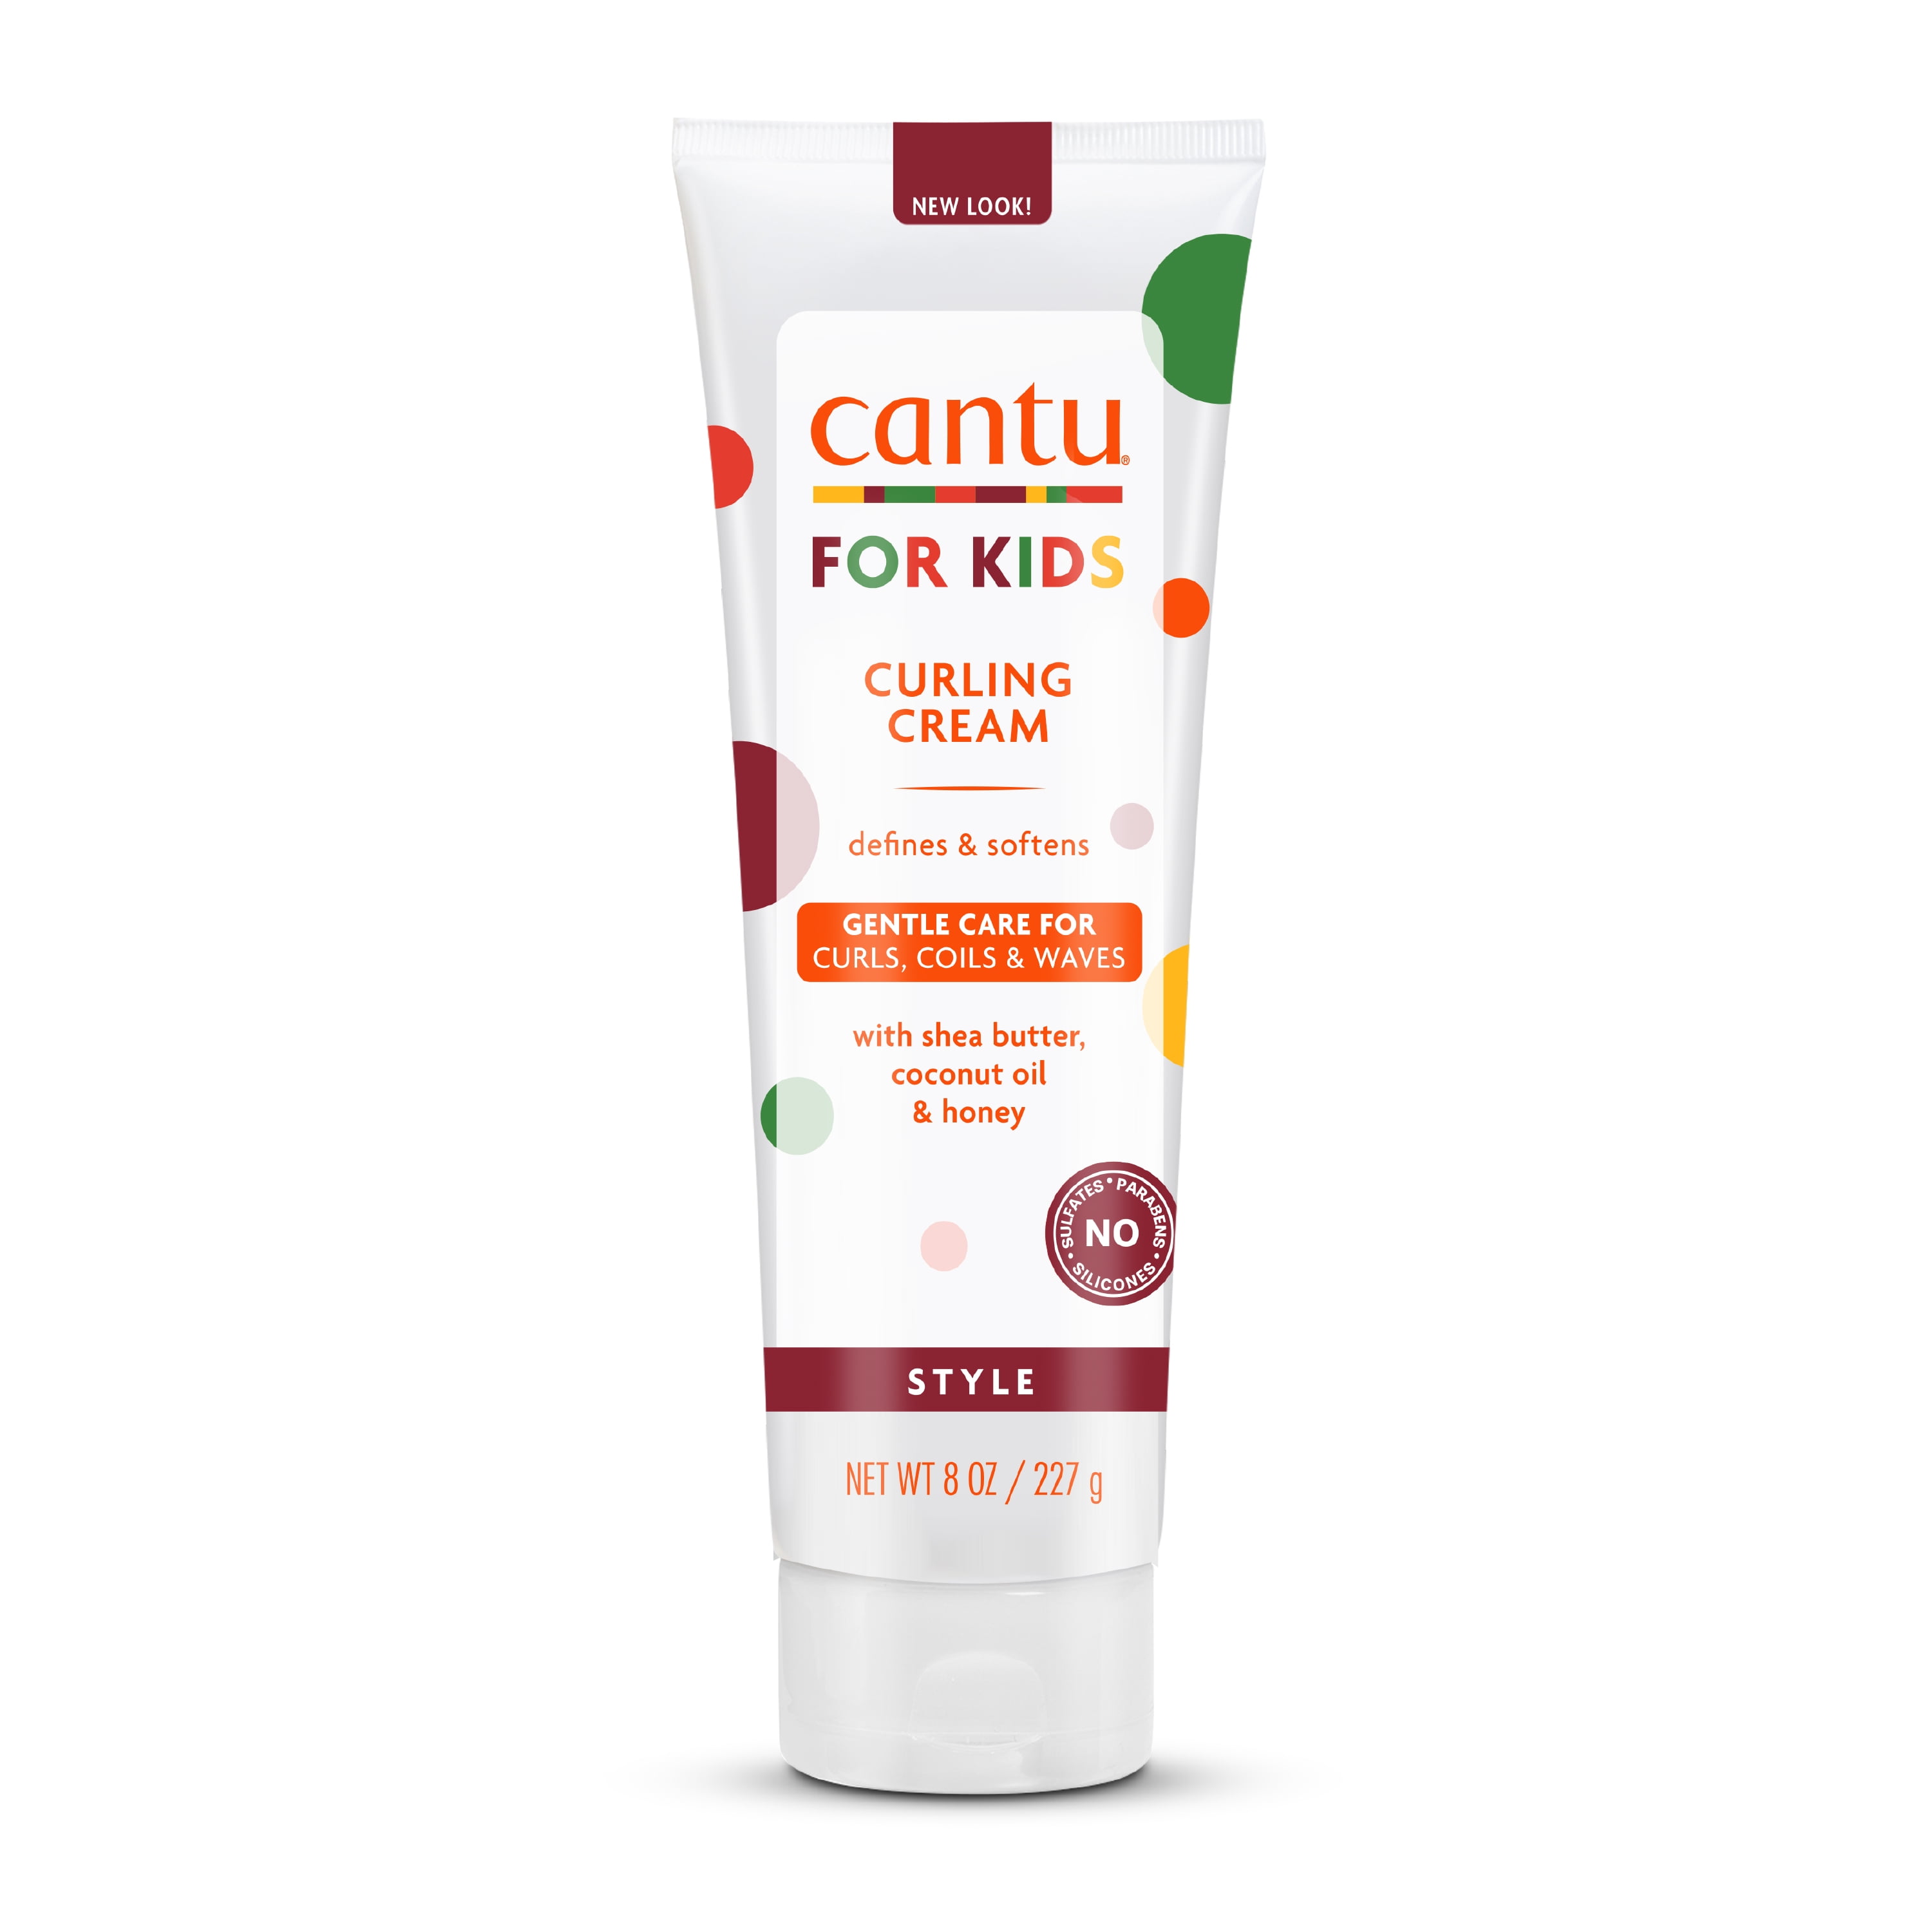 Cantu Care for Kids Paraben & Sulfate-Free Curling Cream with Shea Butter,  8 oz